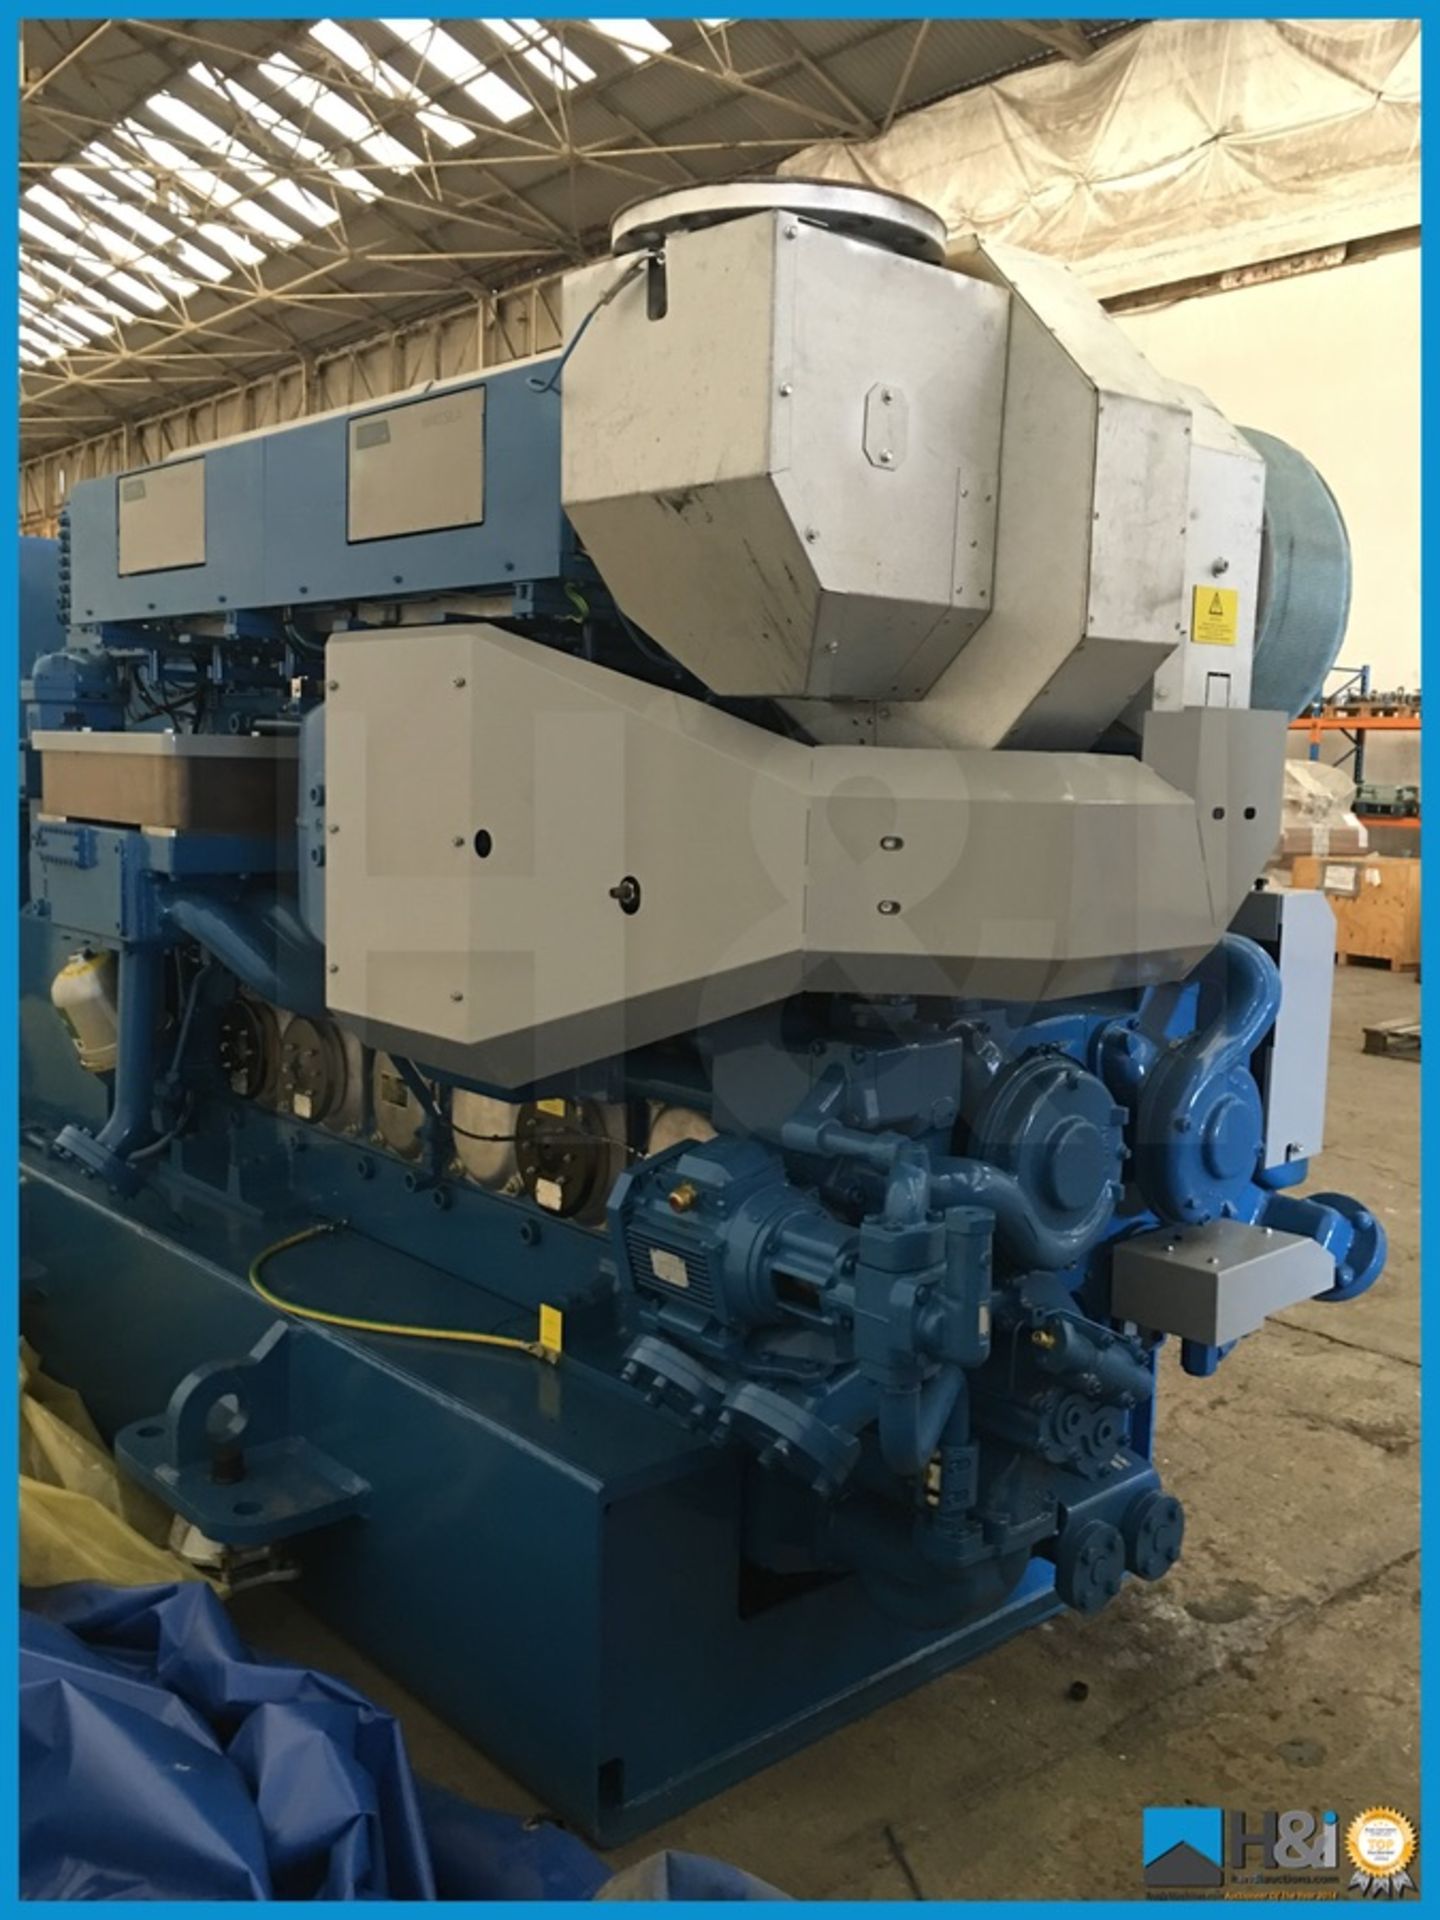 Unused Wartsila 6L20 high capacity diesel generator manufactured in 2013 for a large marine - Image 12 of 22